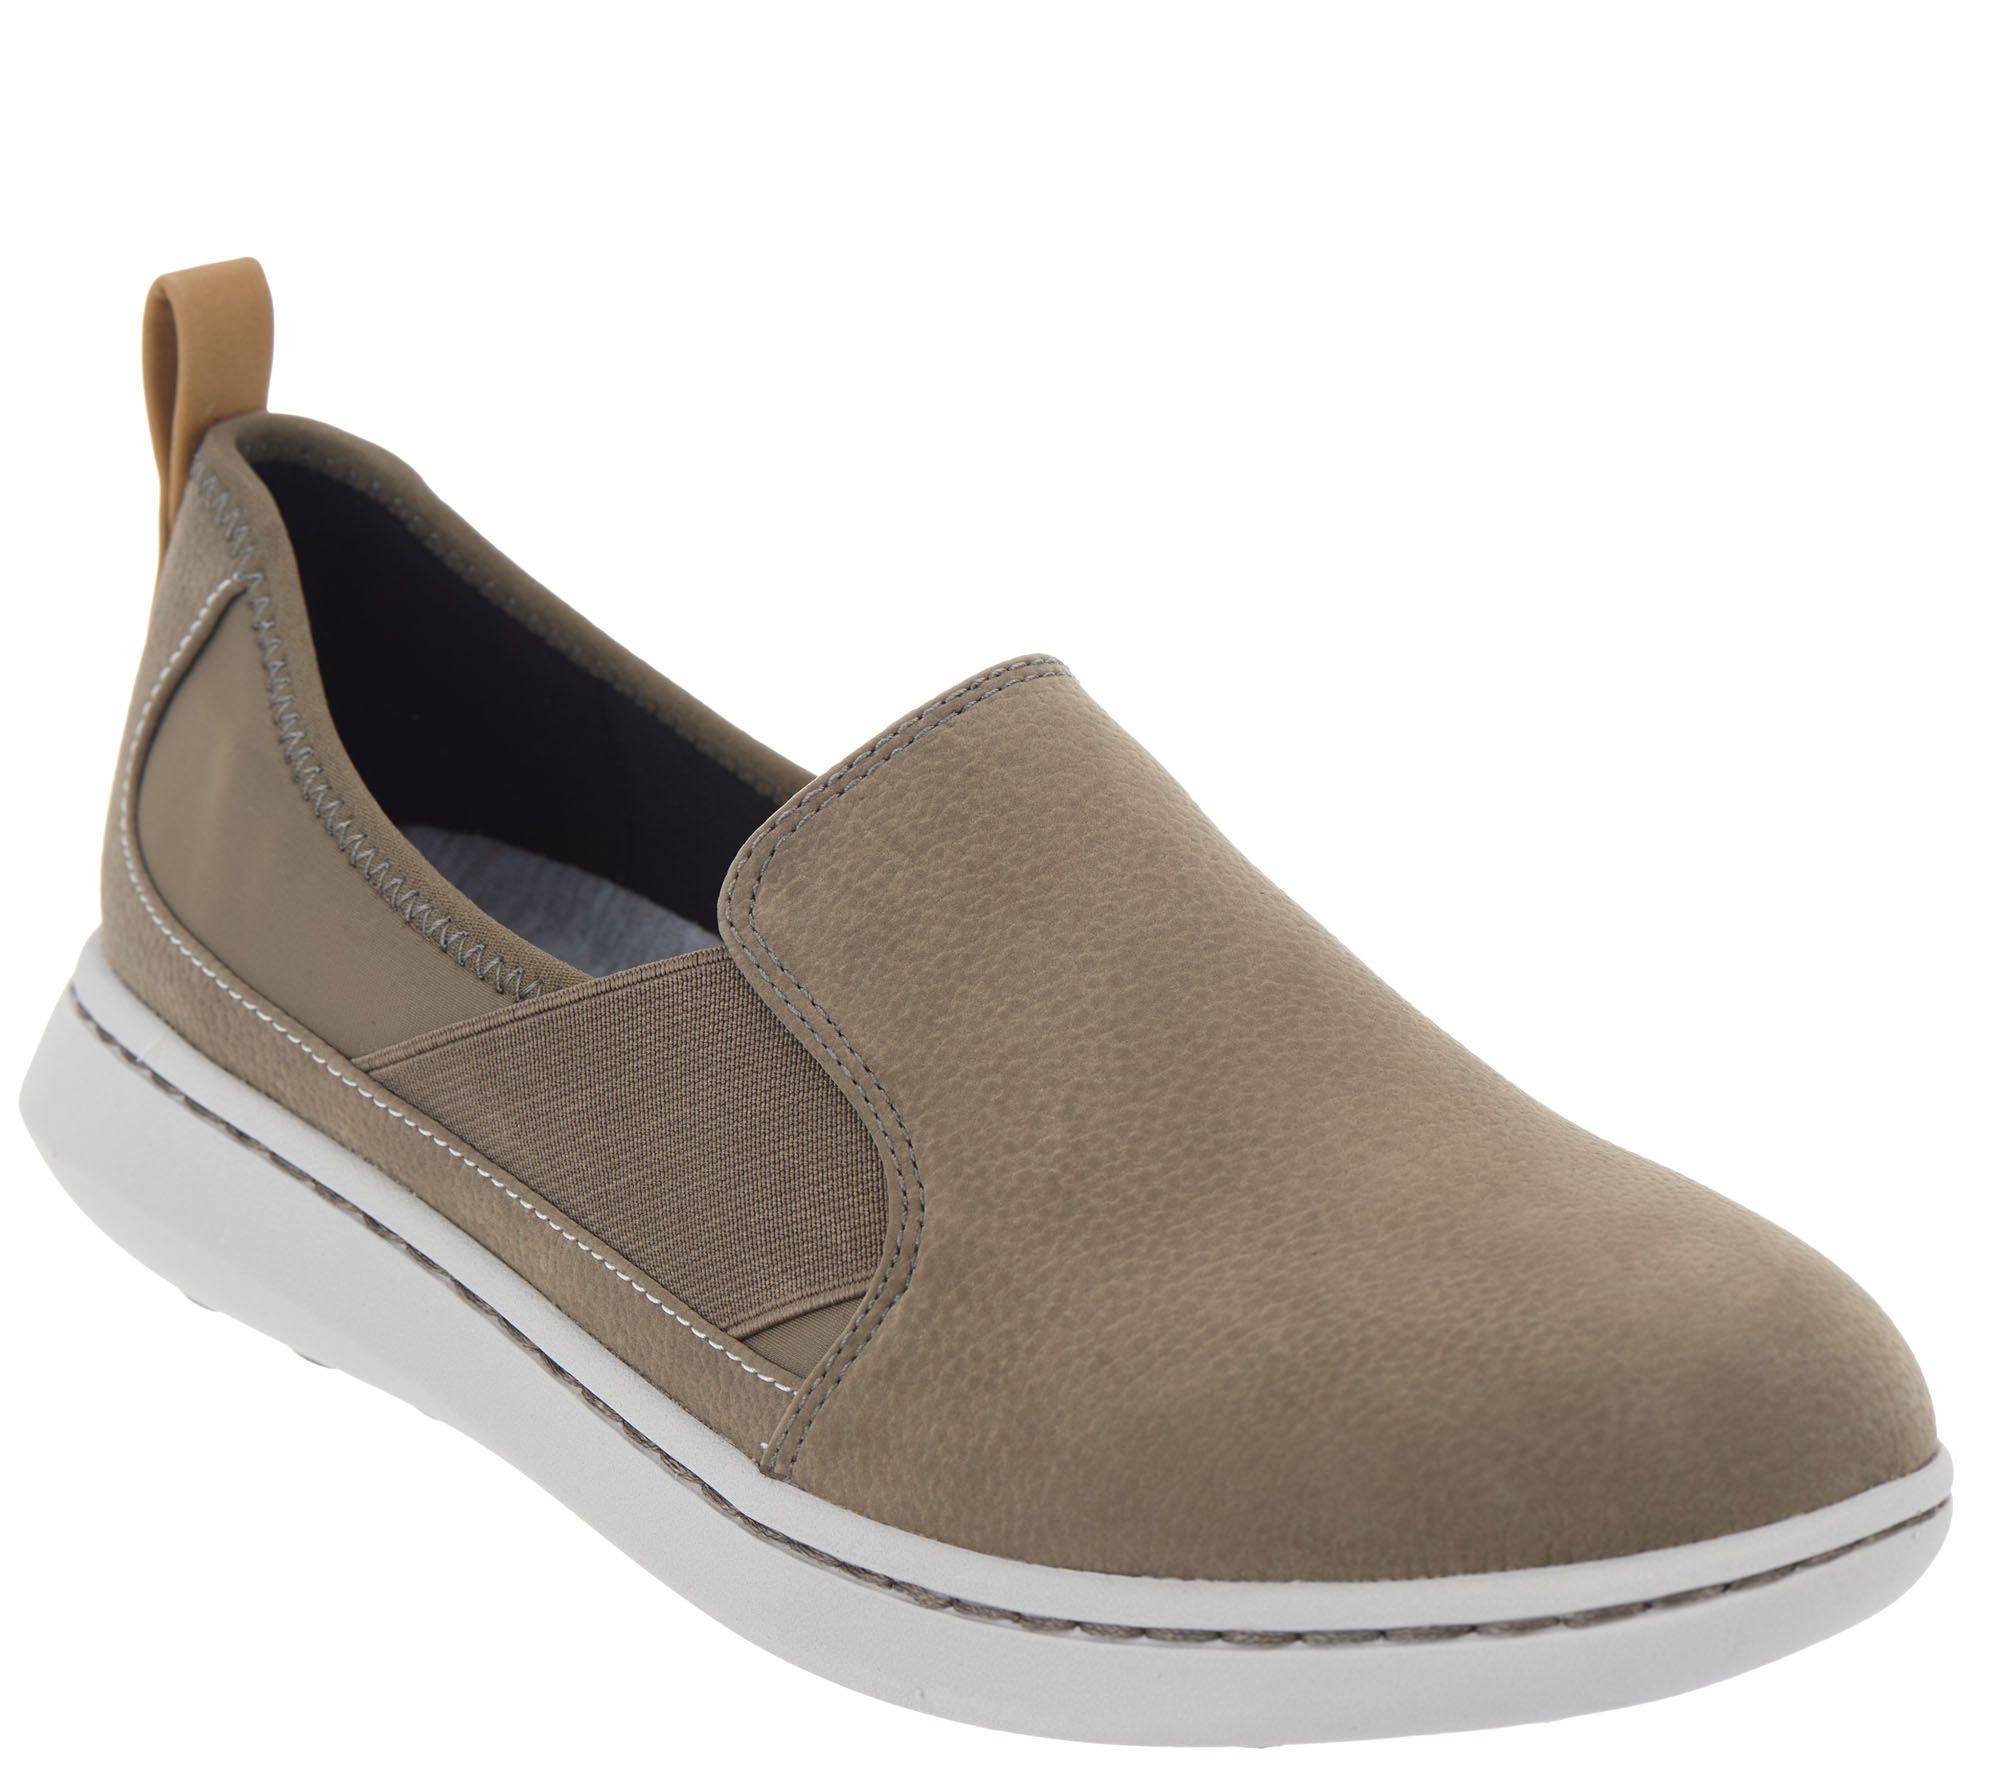 Clarks Slip-on Shoes - Step Move Jump 